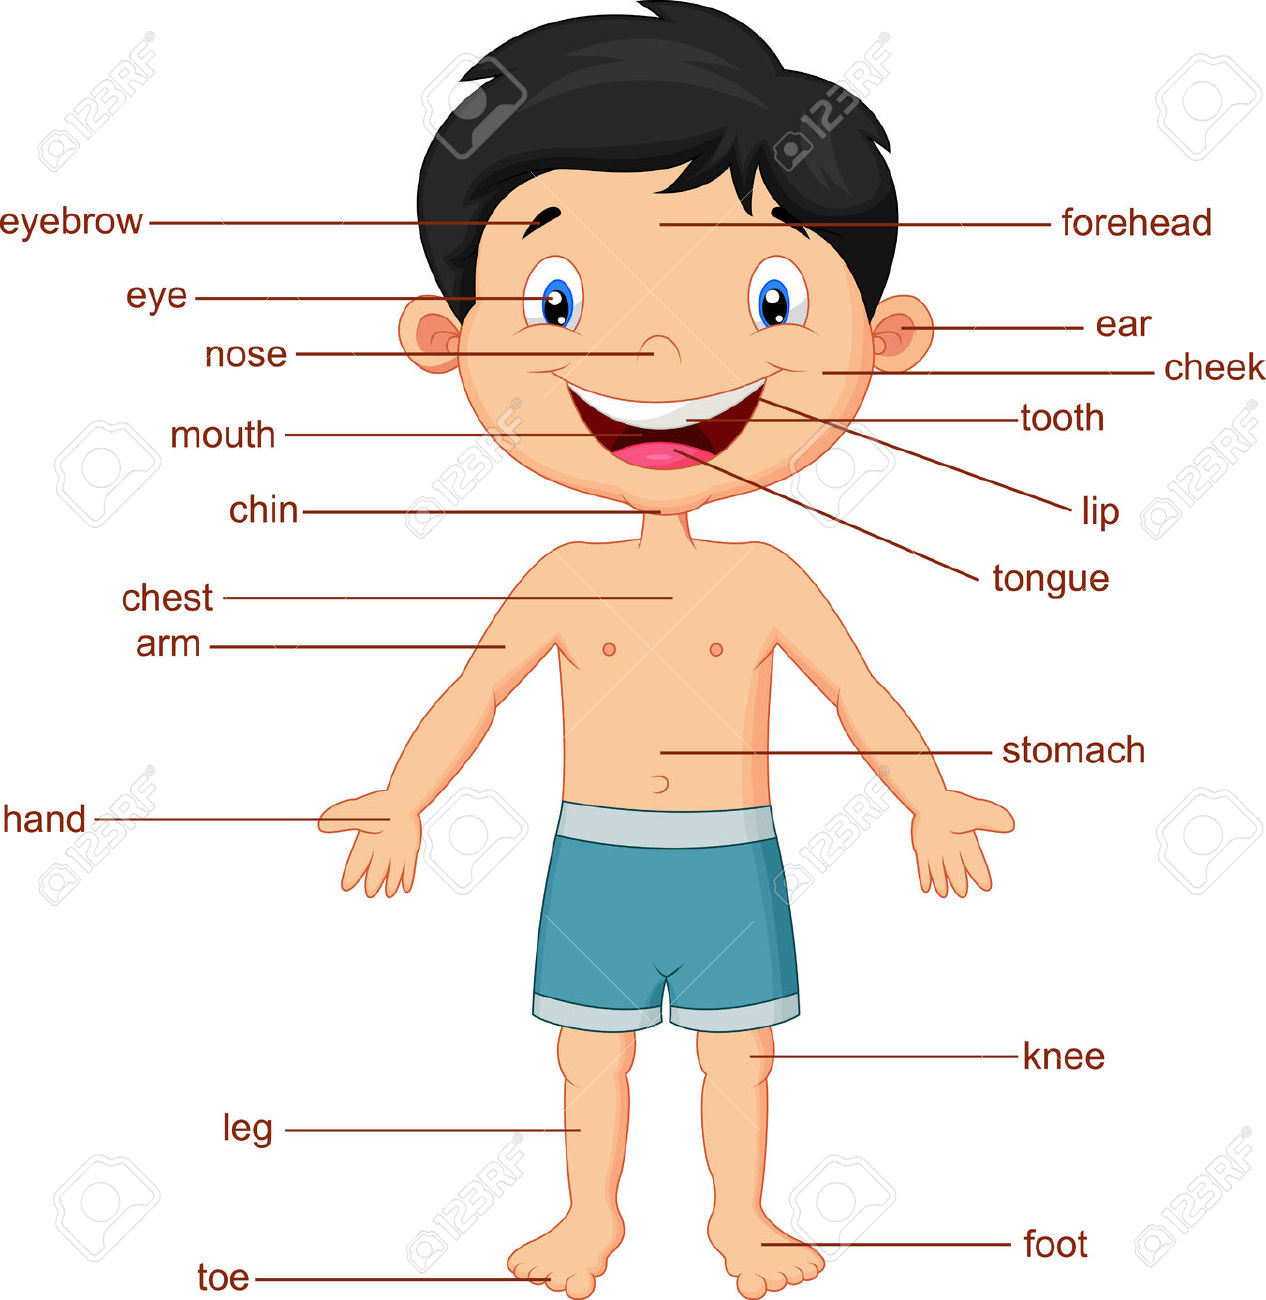 Part of the body clipart - Clipground